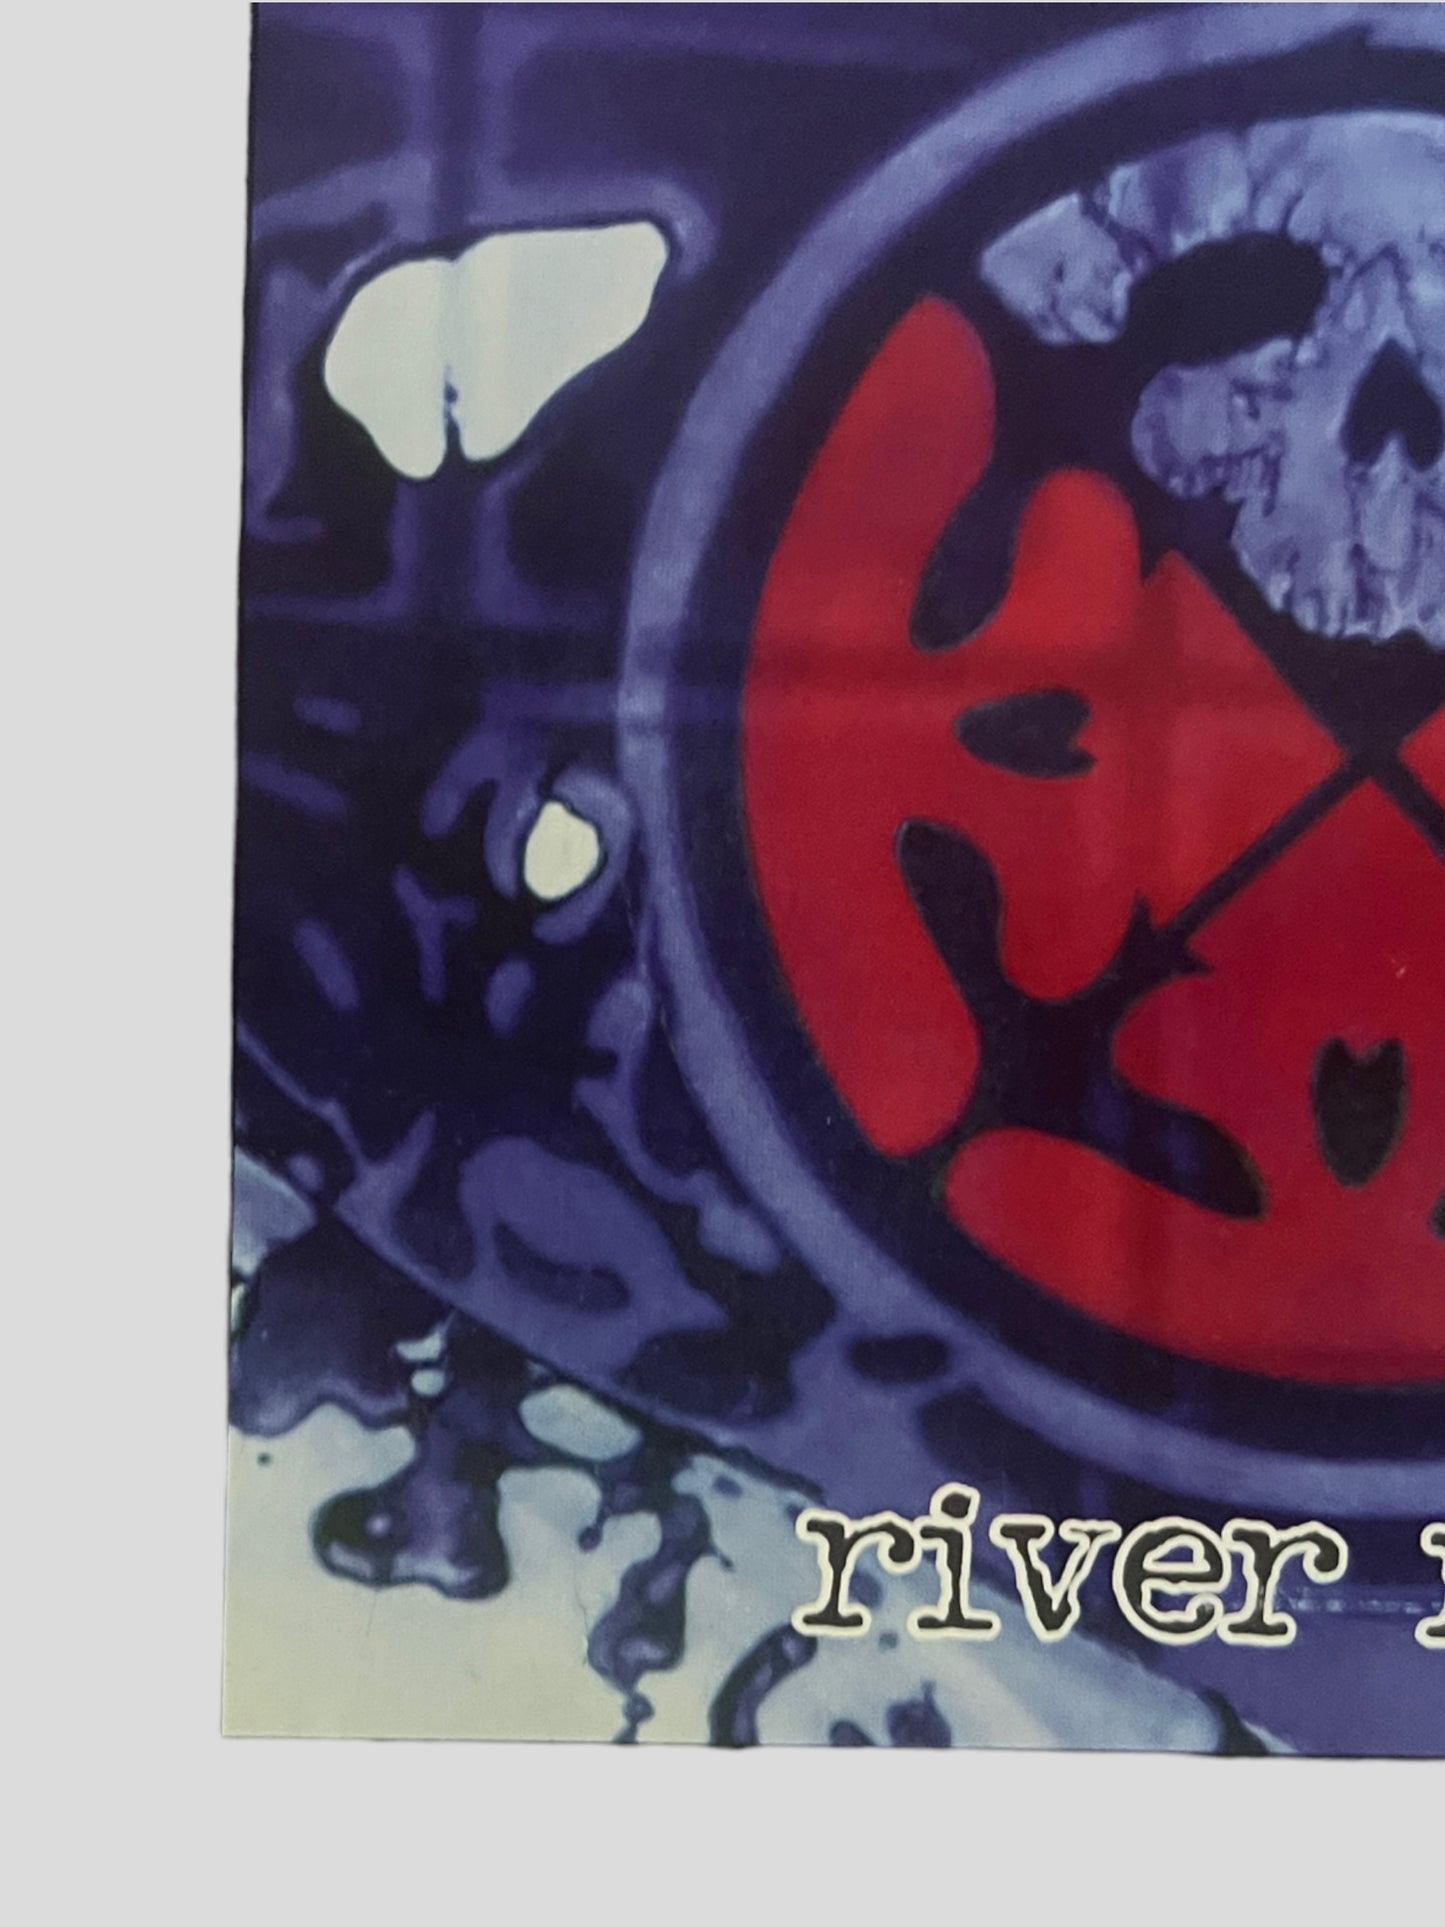 Life of Agony - River Runs Red Vintage 1993 Promo Poster 24 x 18 inches